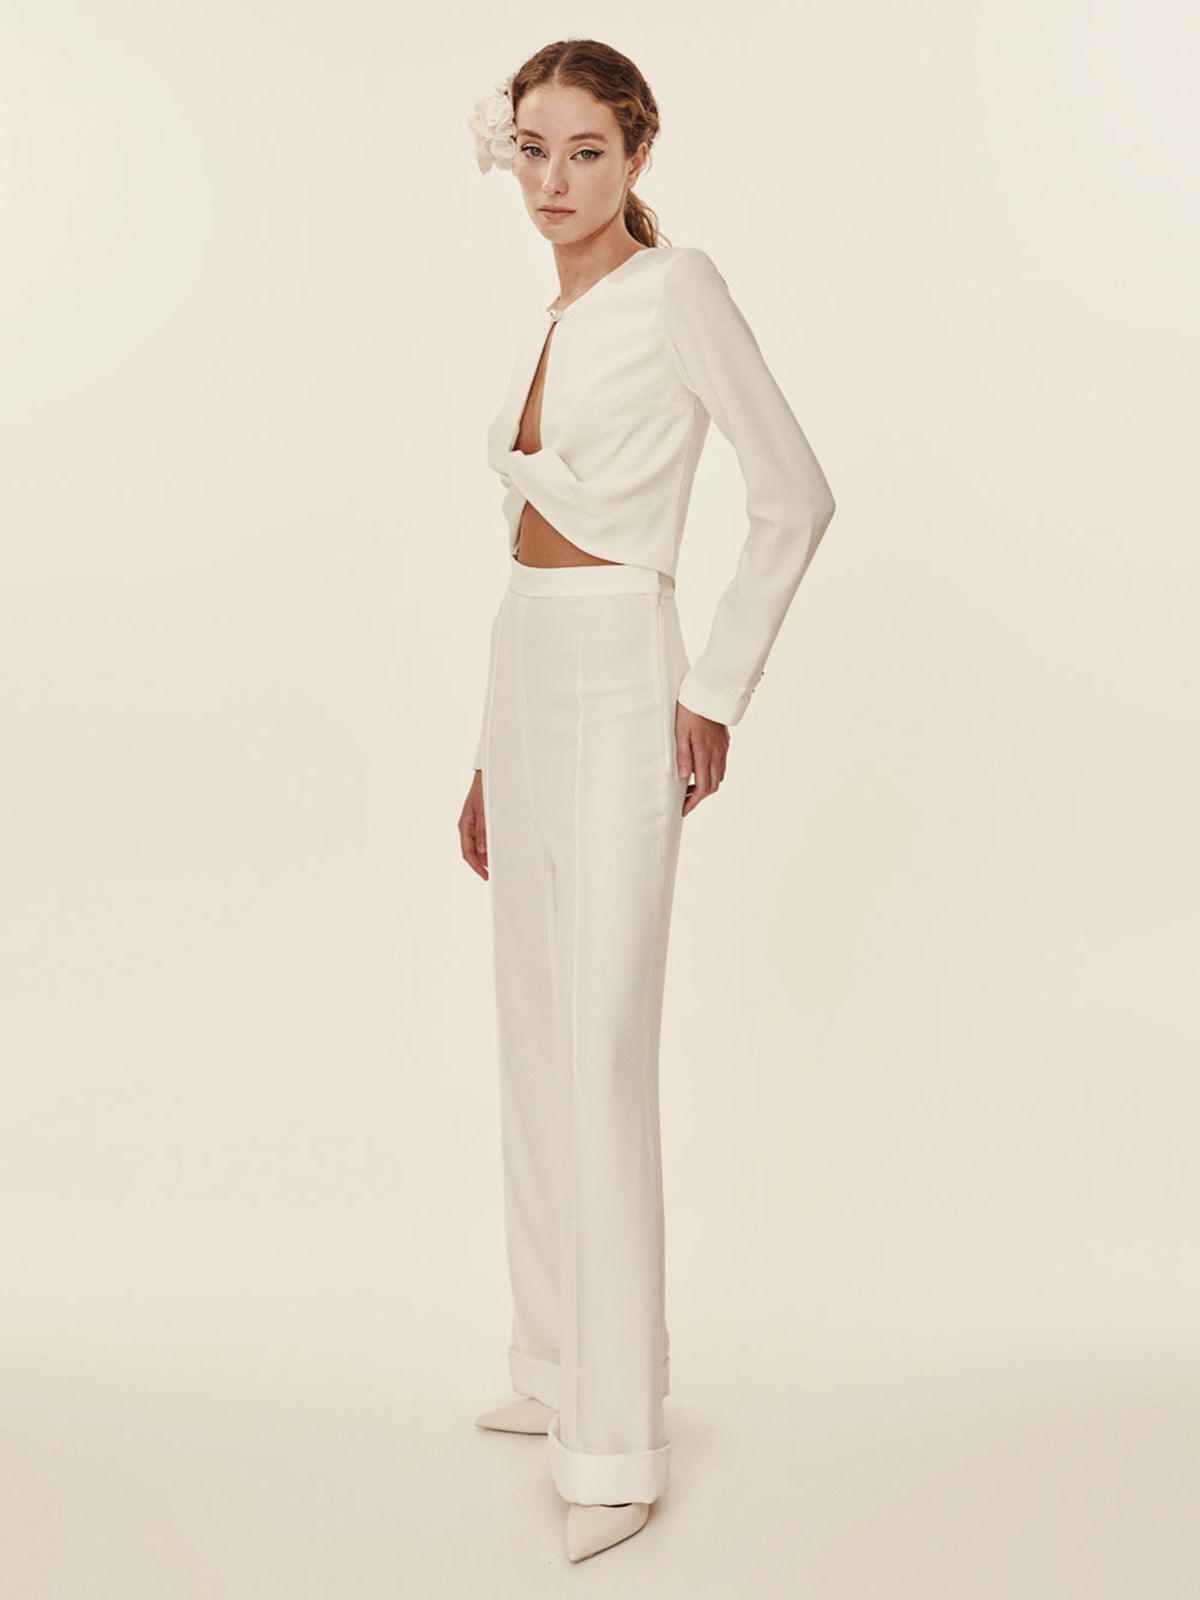 Jovani 05307 and 05308 Beaded Top Two Piece Bridal Pant Suit -  MadameBridal.com